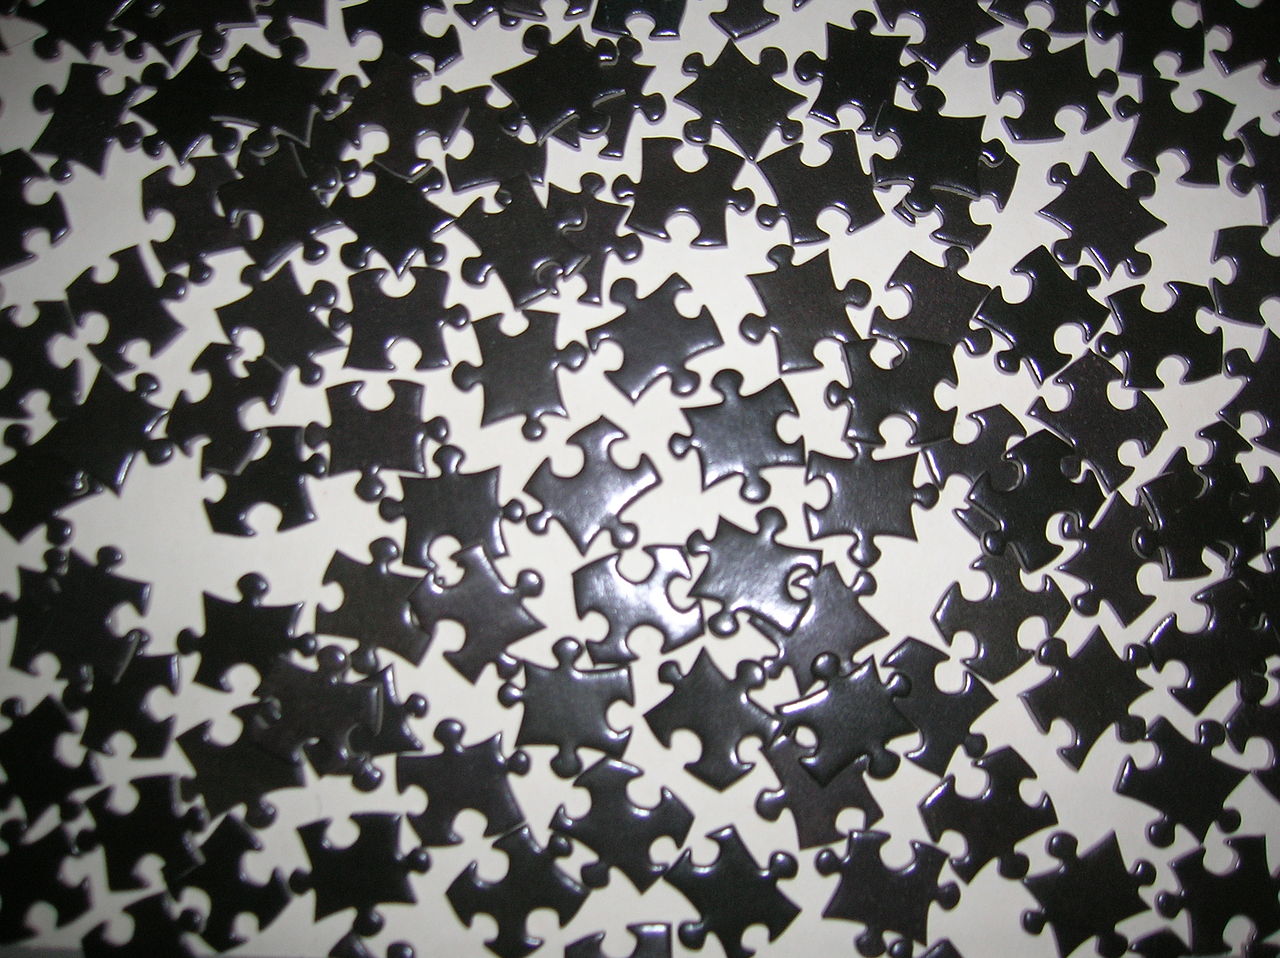 File:Puzzle pieces 1 - Wikimedia Commons